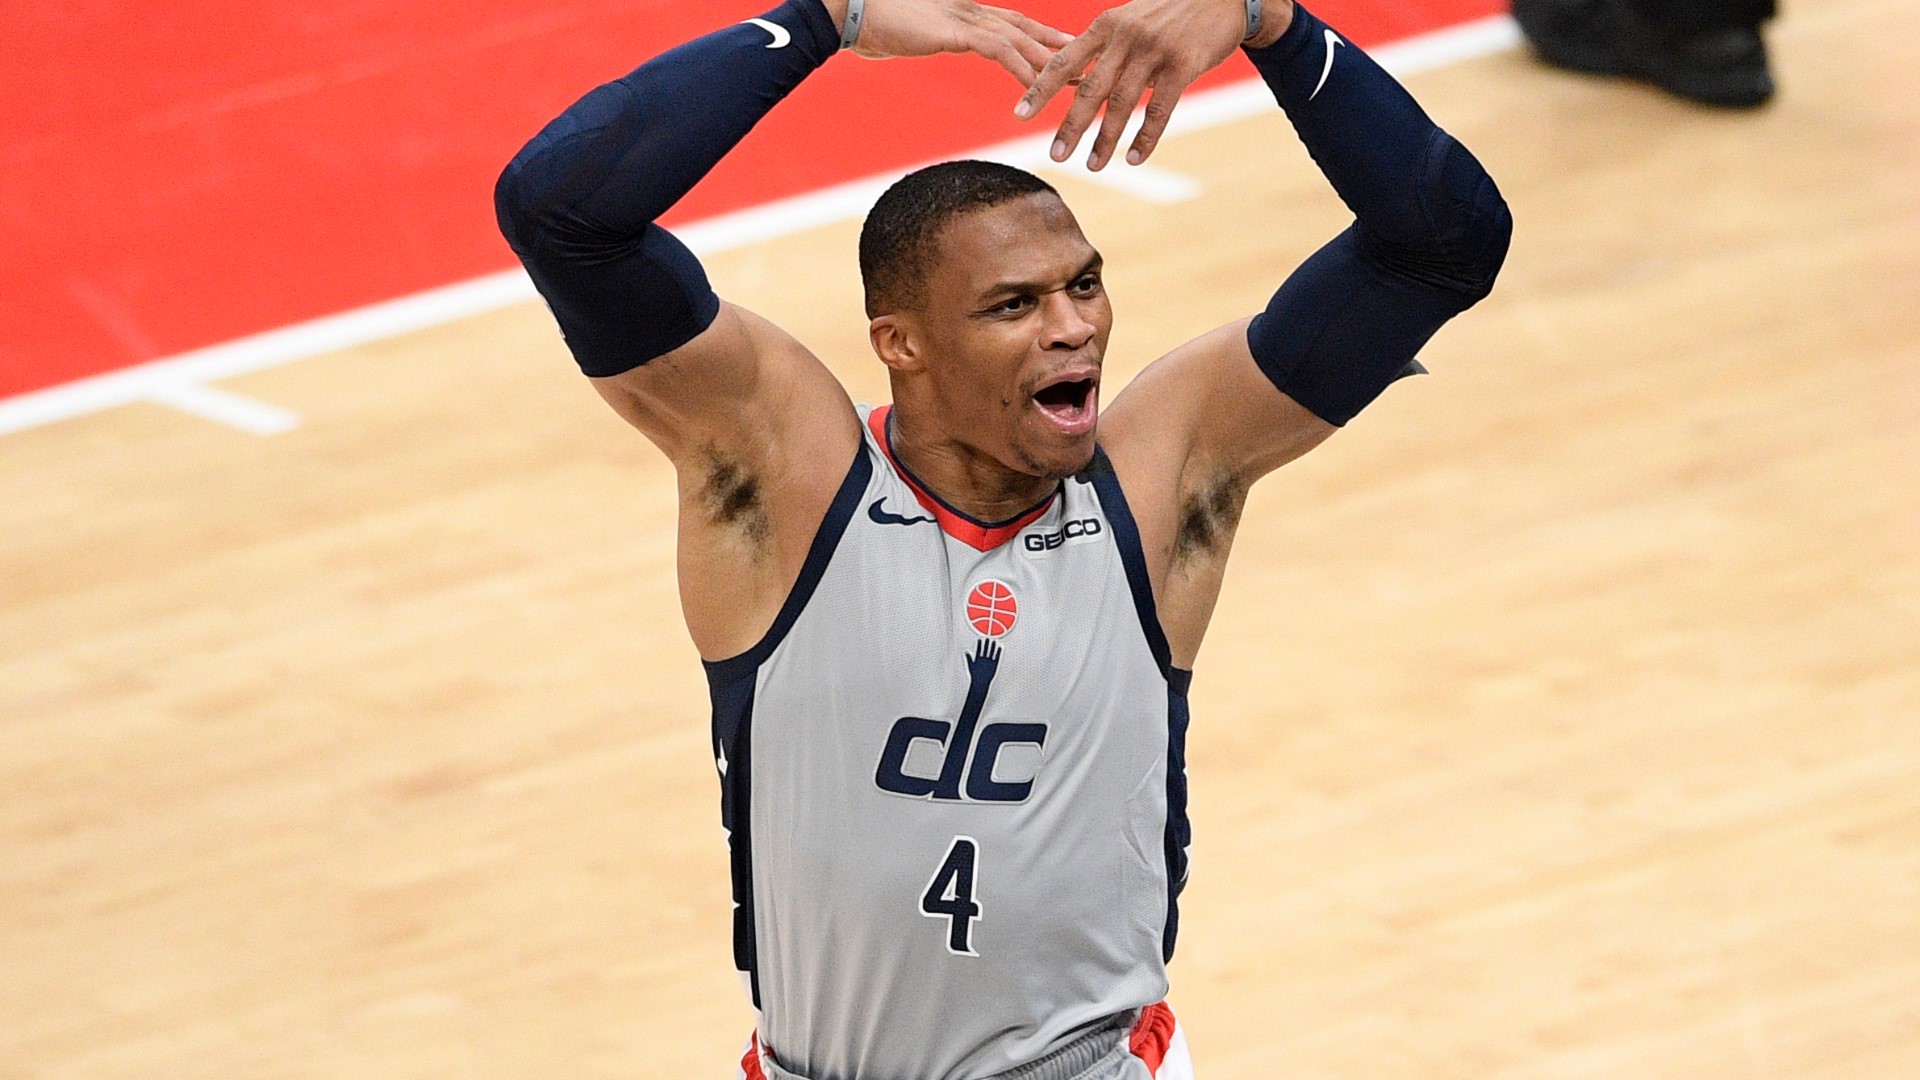 The Wizards dominated the Indiana Pacers to punch their ticket to the playoffs for the first time since 2018.